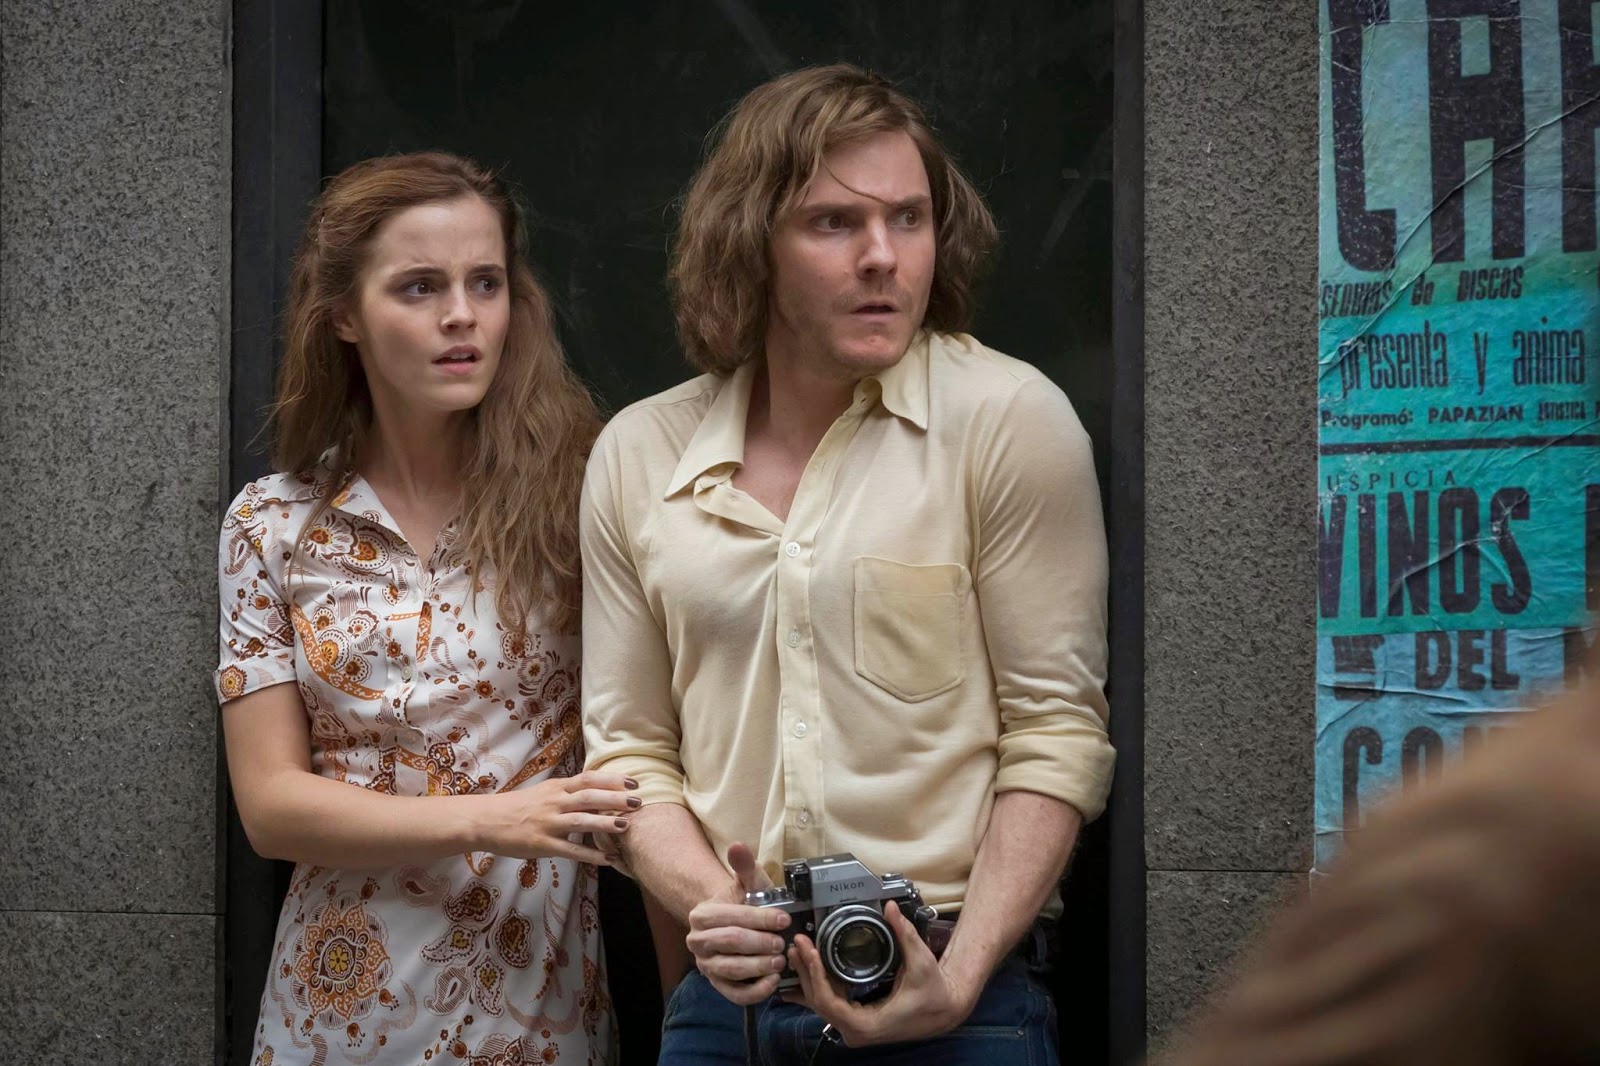 New Trailer for Emma Watson's Film "Colonia" TheLeaky